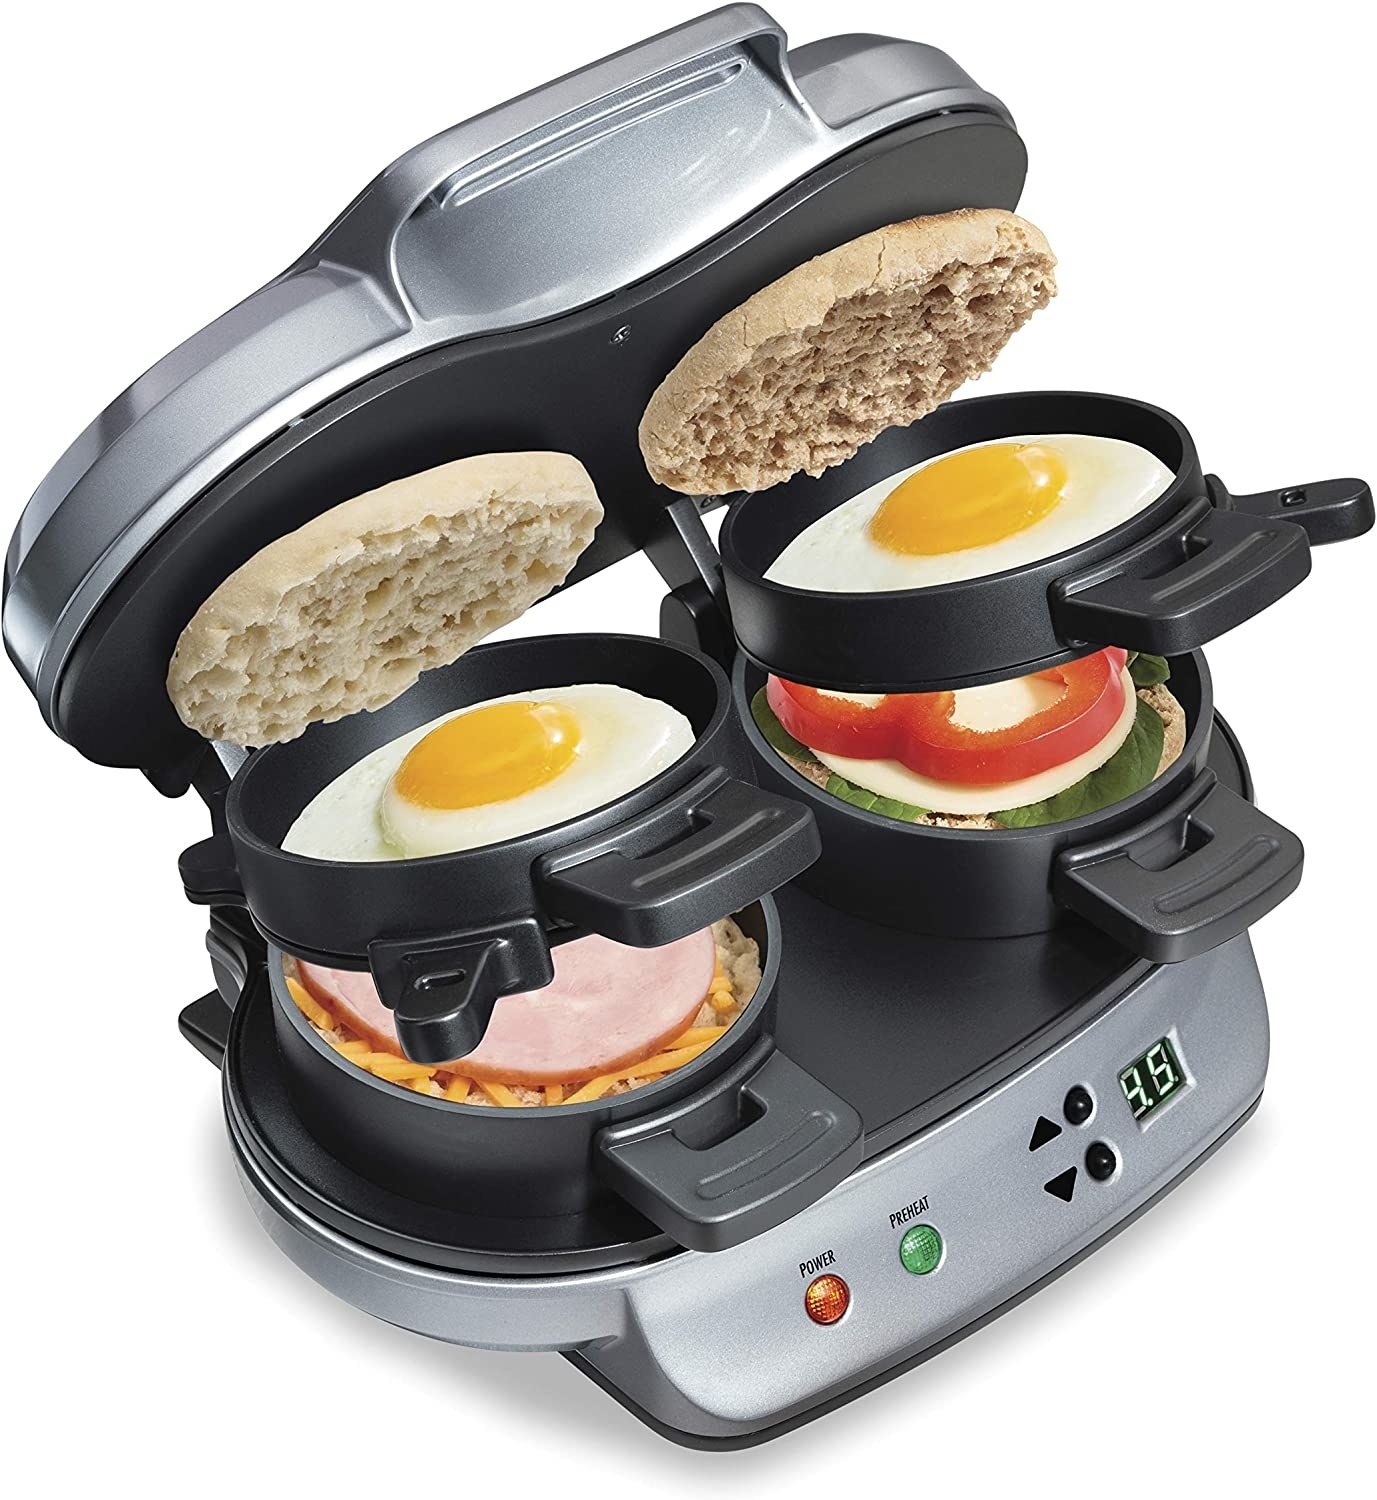 Two sandwiches cooking in the sandwich maker